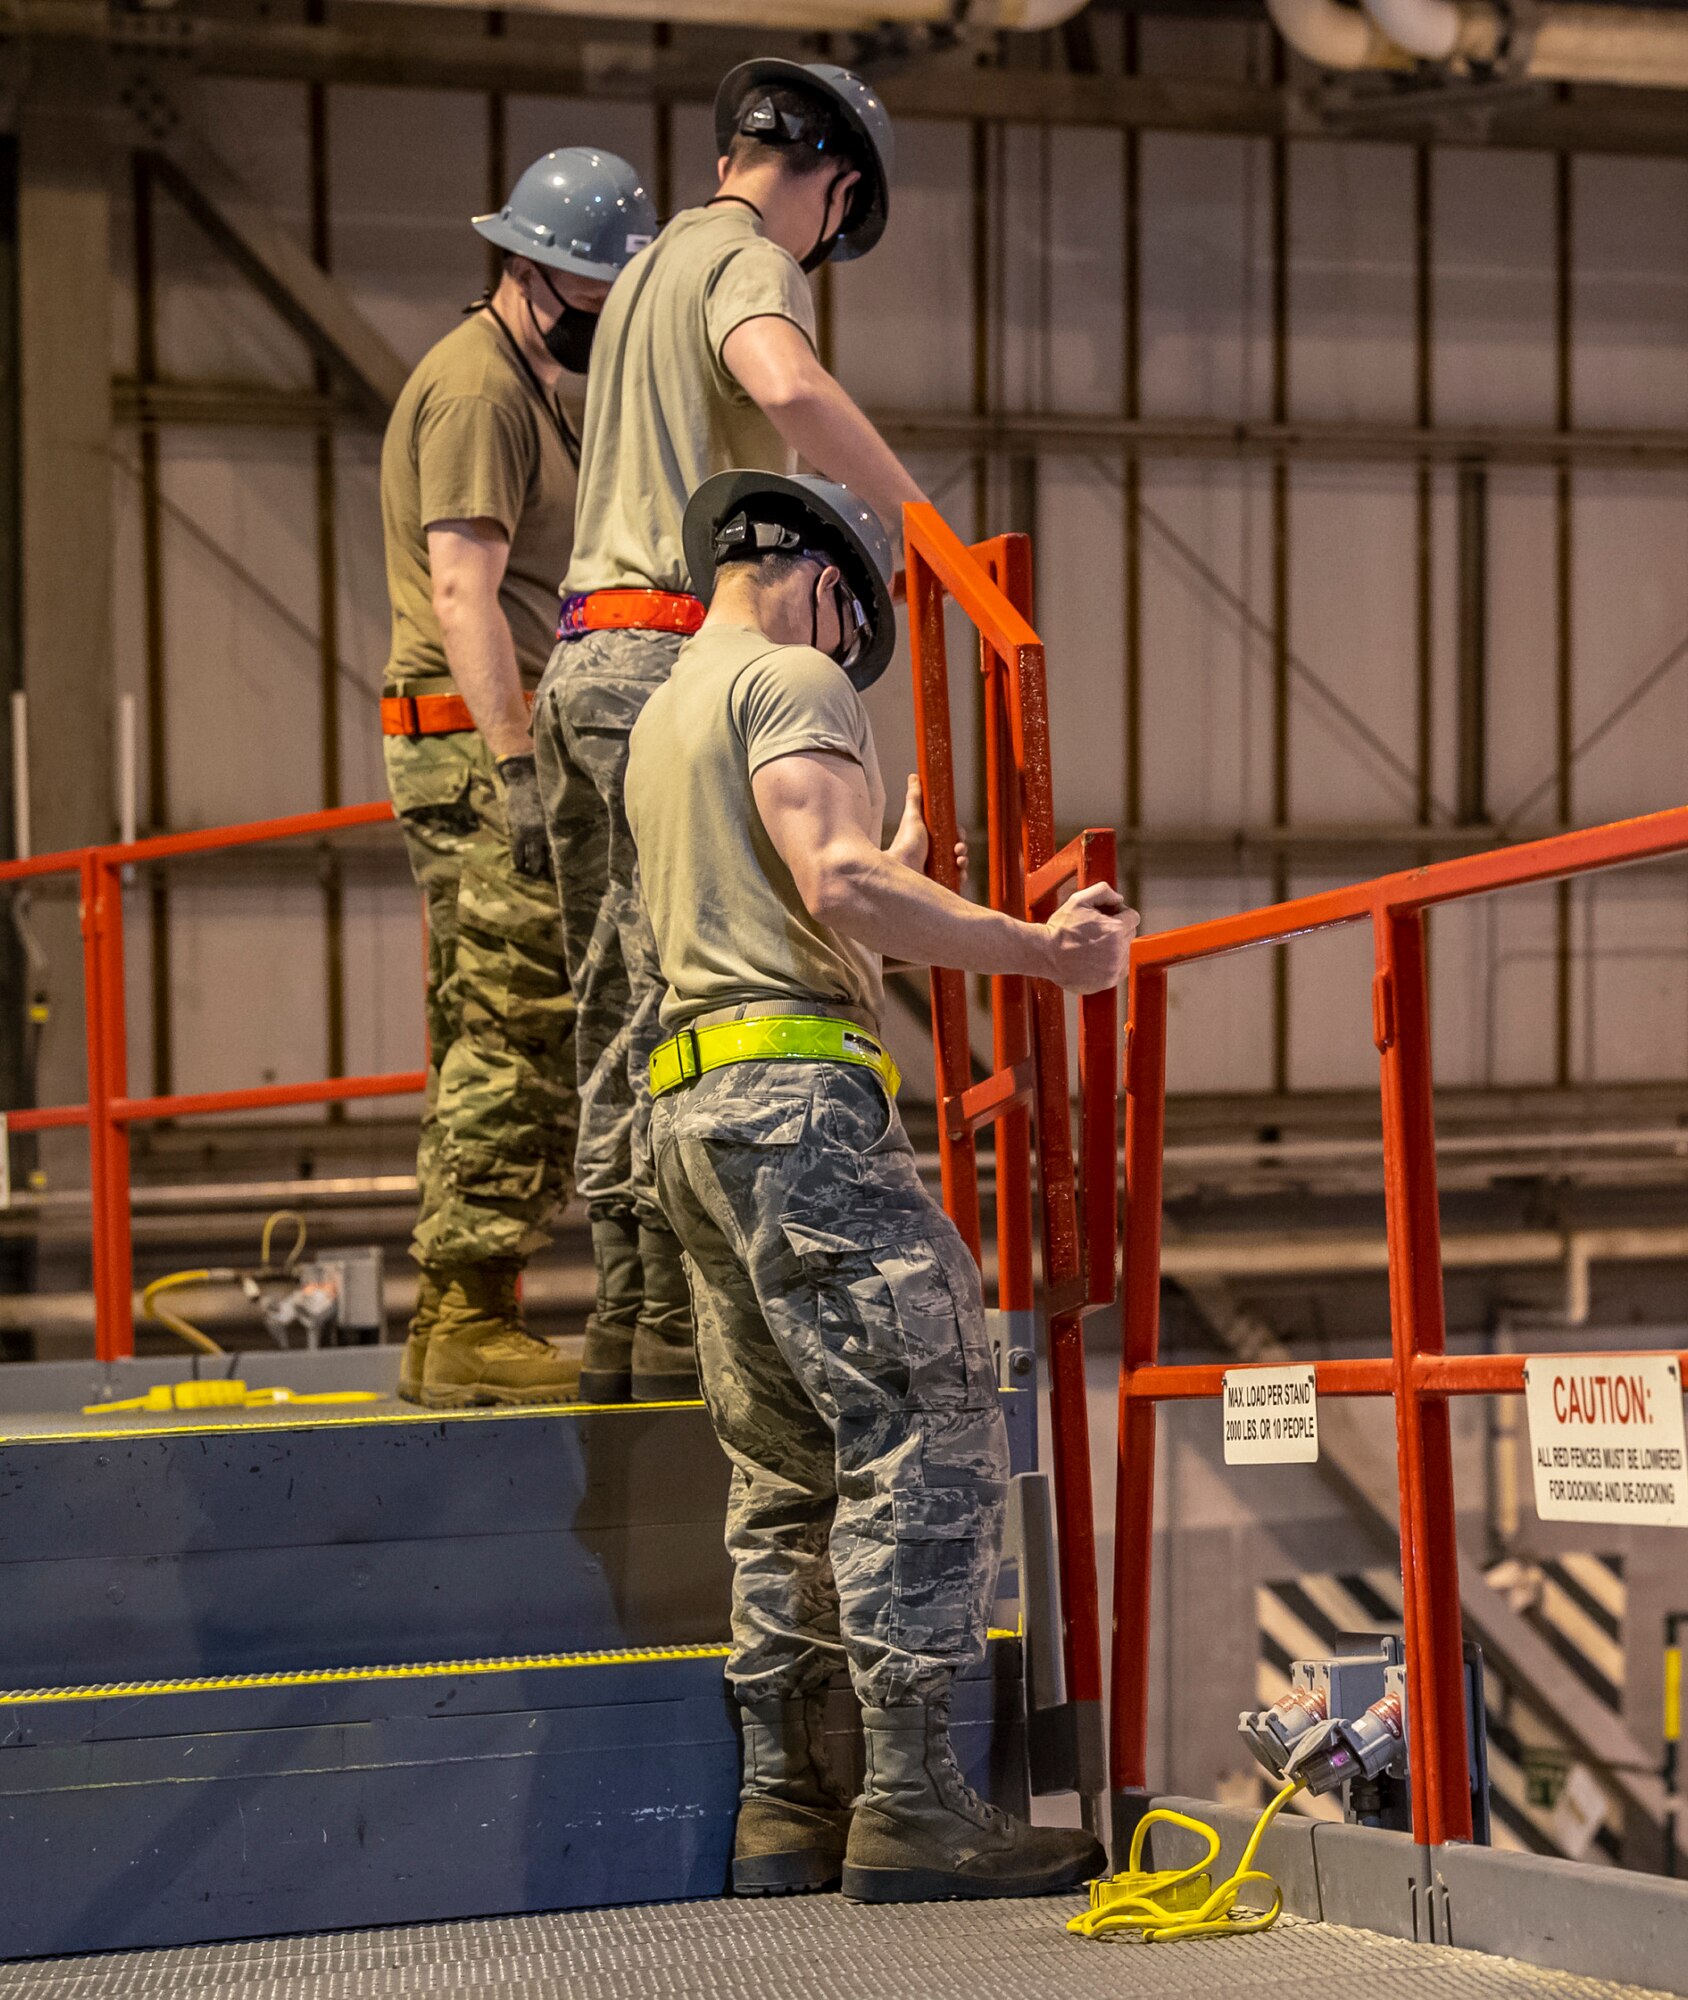 436th Maintenance Squadron aircraft maintenance personnel place guardrails along the edges of the stands in the Isochronal Inspection Dock on Dover Air Force Base, Delaware, April 9, 2020. Maintenance personnel wear cloth masks and try to maintain social distance from one another to mitigate the spread of COVID-19 while performing their duties. (U.S. Air Force photo by Senior Airman Christopher Quail)